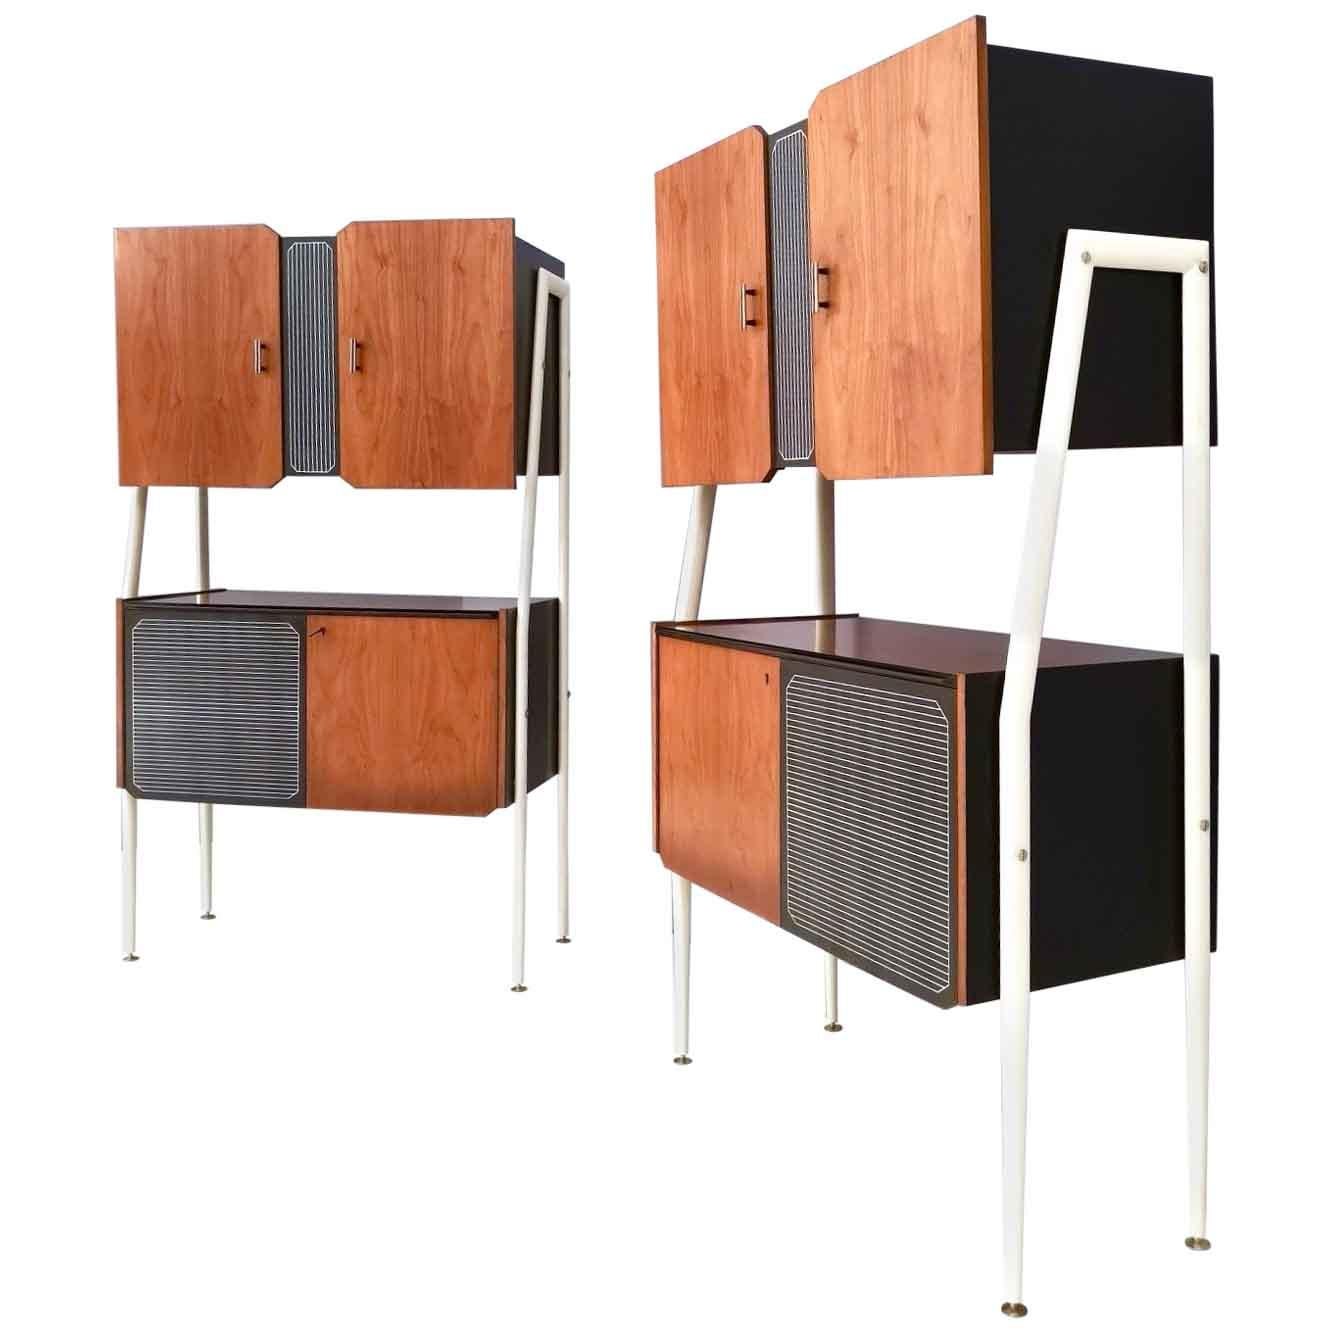 Pair of Midcentury Walnut and Lacquered Wood Cabinets, Italy, 1950s